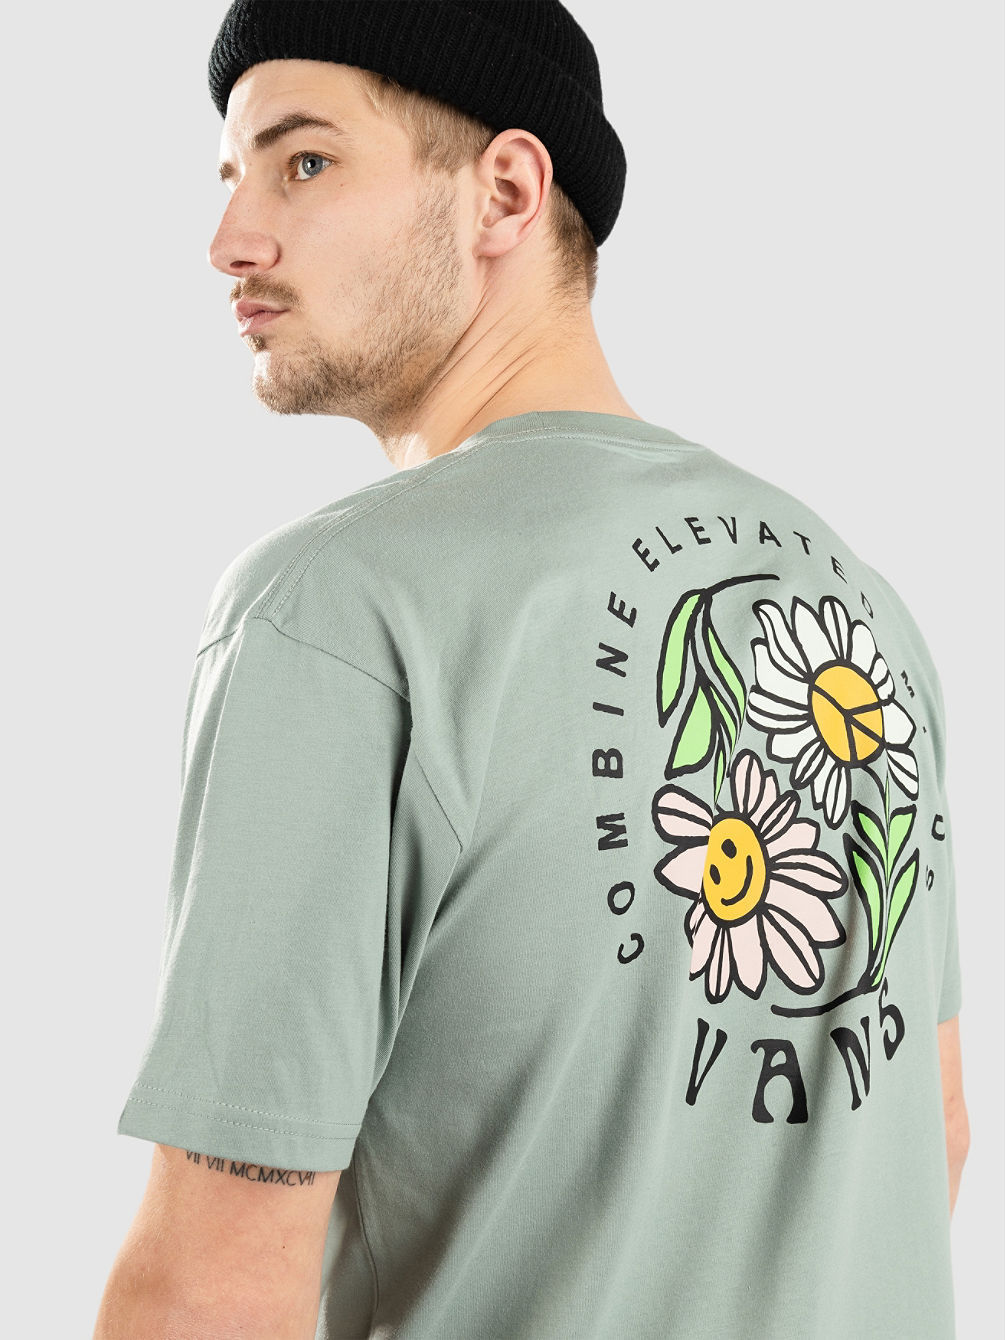 Elevated Minds T-shirt